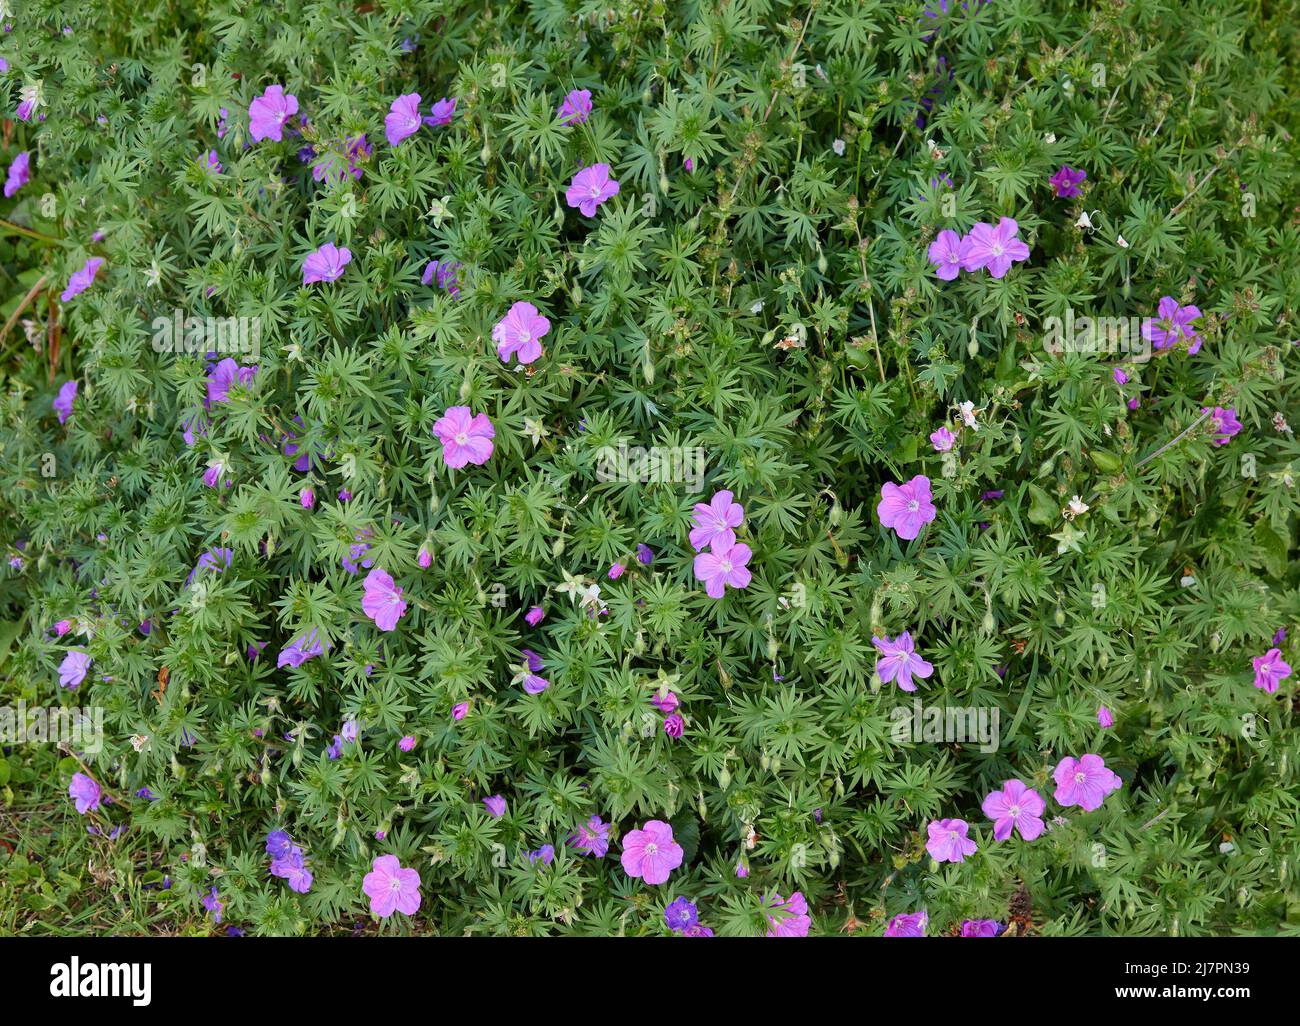 Blue flowering herbaceous geranium seen outdoors in May. Stock Photo